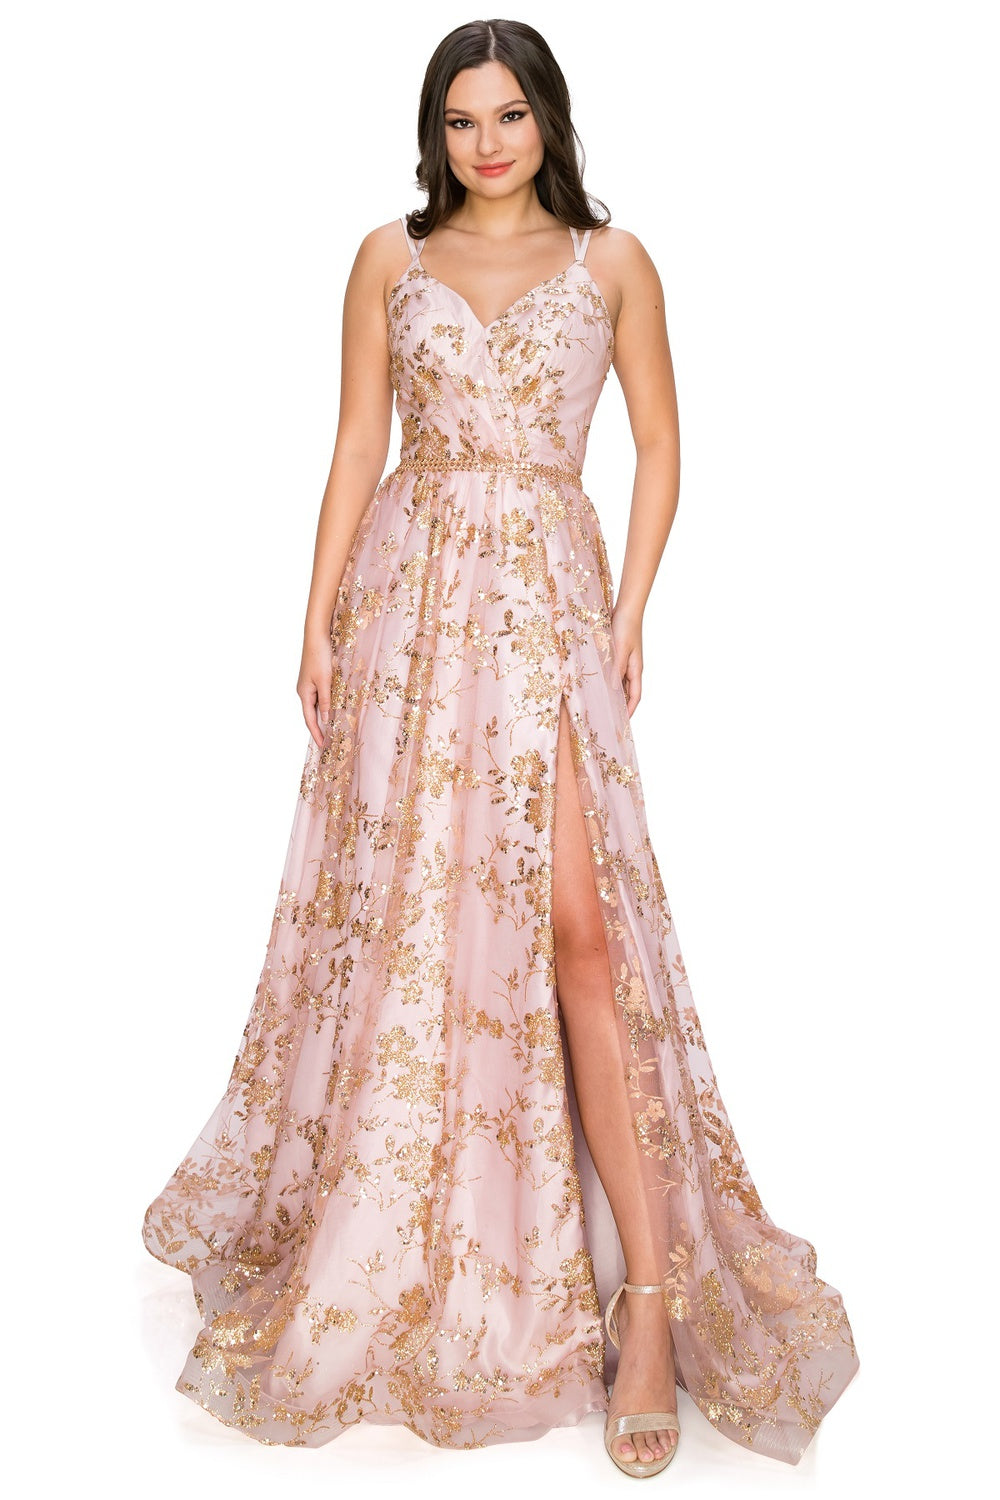 Sequin Floral Gown A-line Gown by Cinderella Couture USA AS8022J-DROSE - Special Occasion/Curves